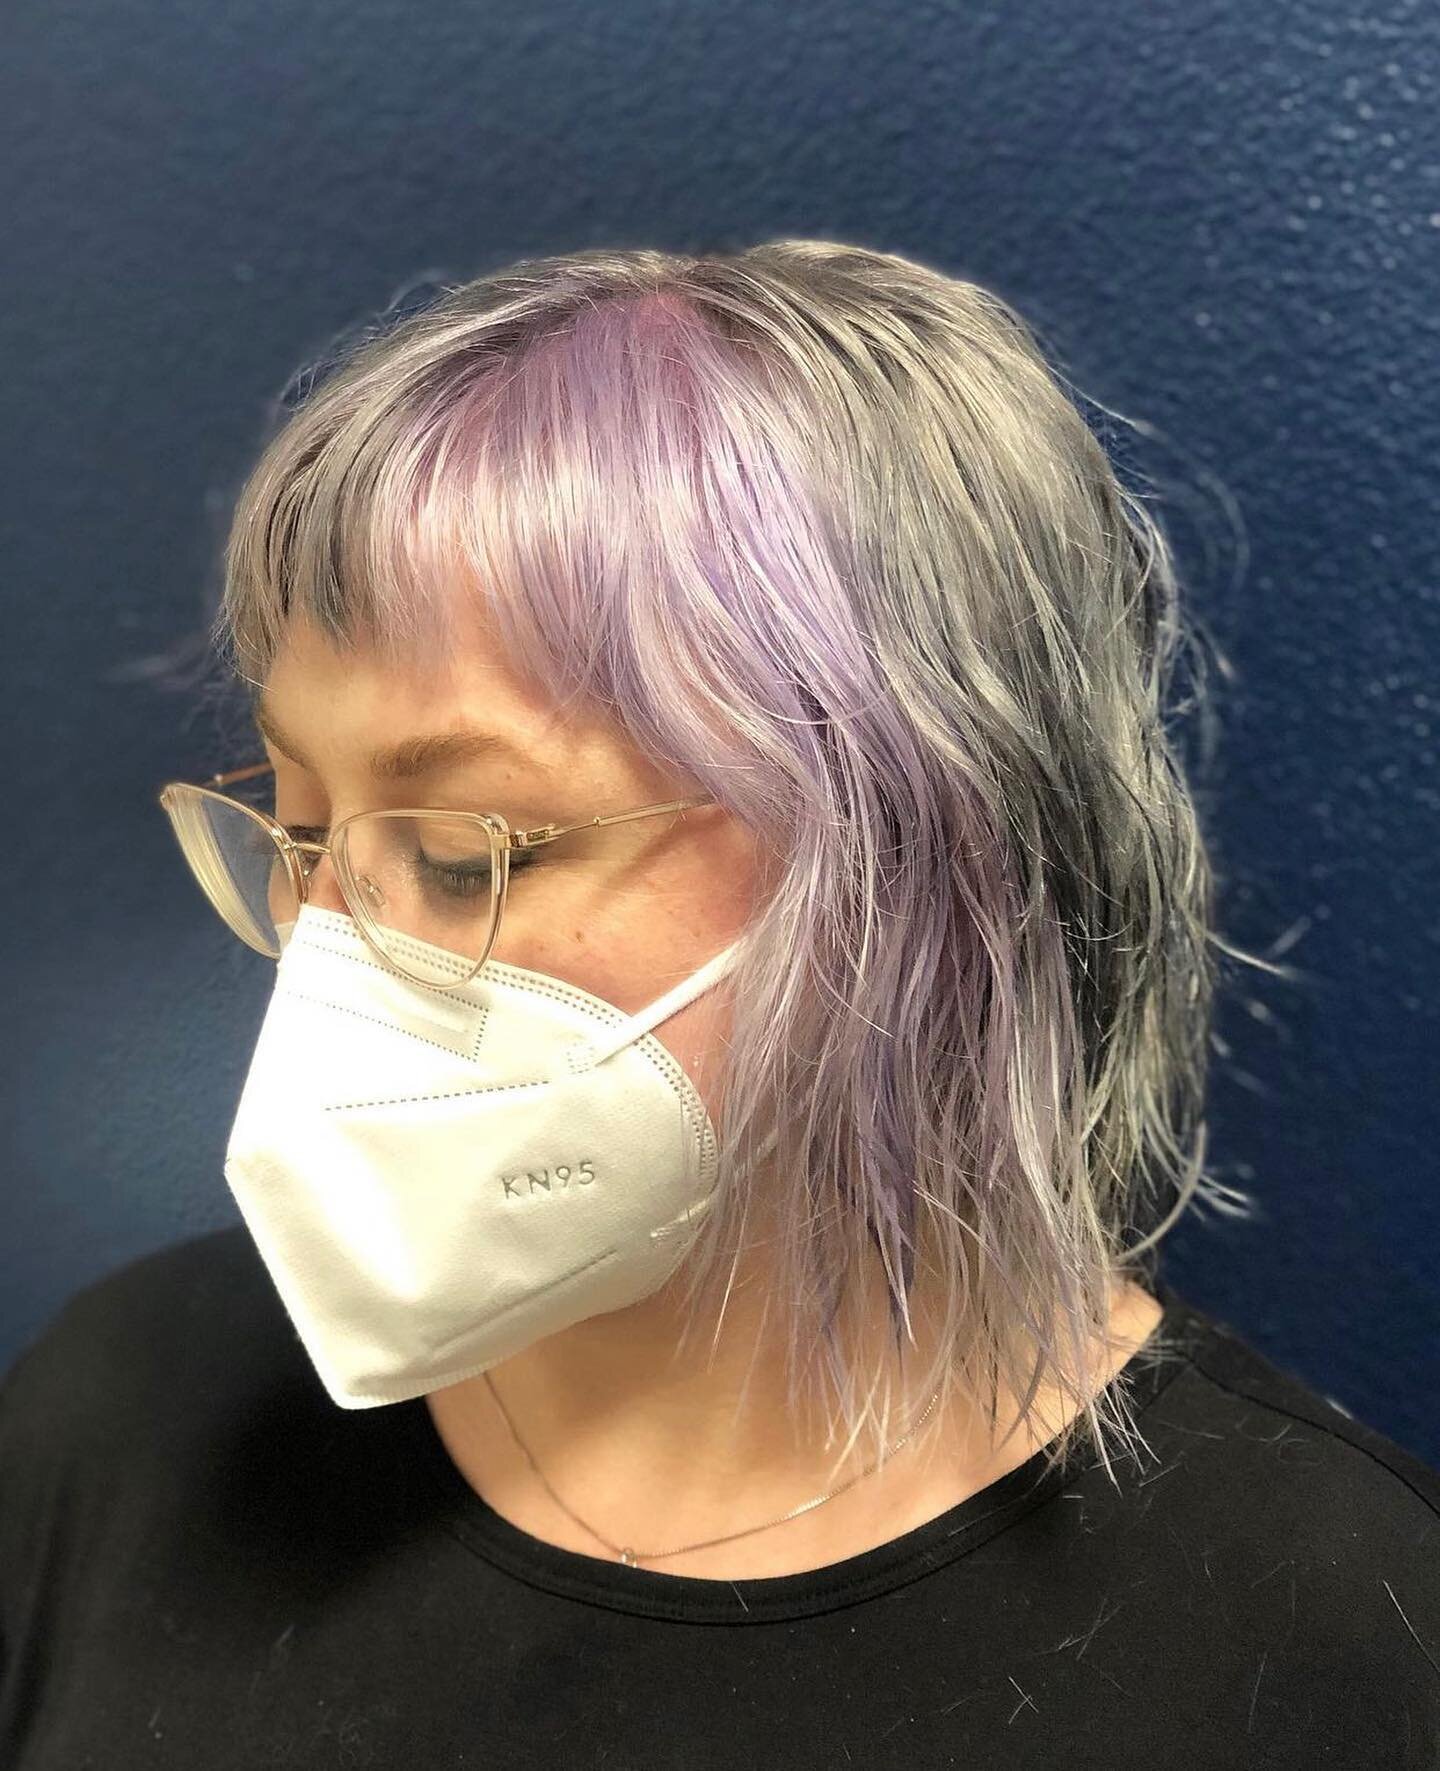 Beautiful color done by @arielle_does_hair !! Book your color consult or get a cut with her on our website! 
.
.

.
#haircolor #pulpriot #silverhair #colorblock #haircut #humboldt #arcata